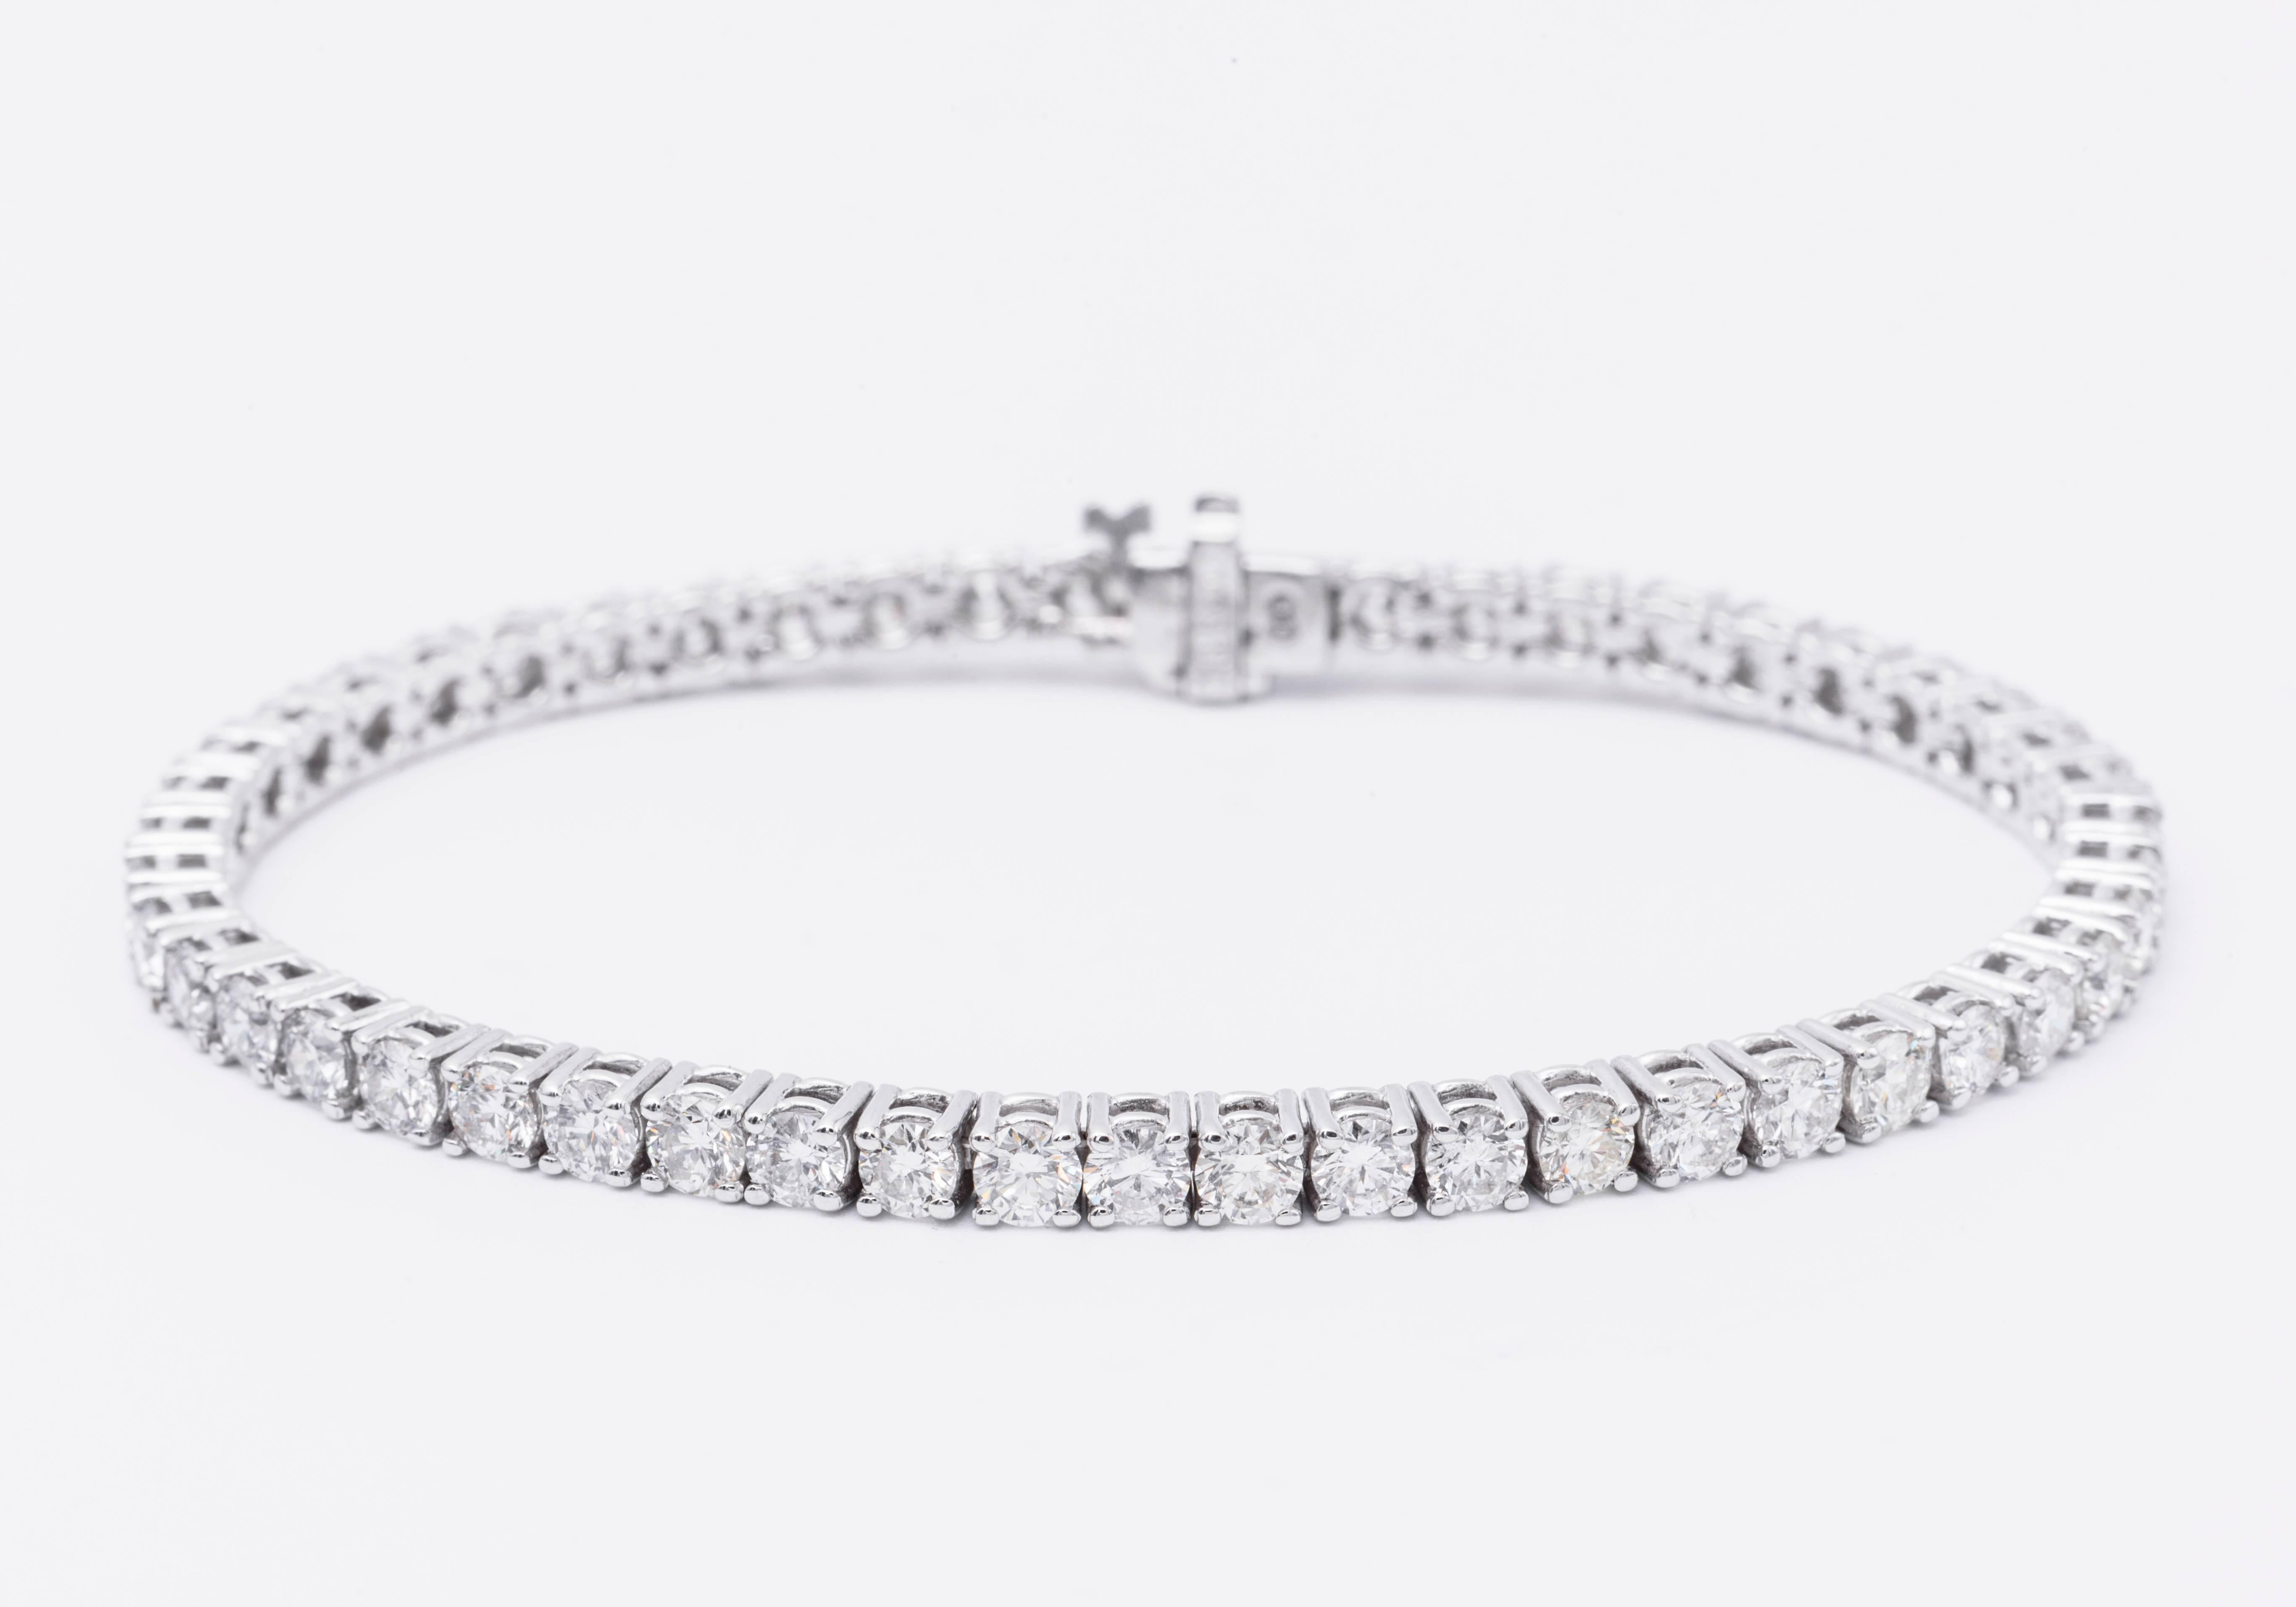 14K white gold tennis bracelet
57 diamonds. all hand picked and matched by our very experienced gemologist.
All diamonds are G-H color and SI quality. 100 percent eye clean to the naked eye. Very bright and full of life.
Our setter is one of the